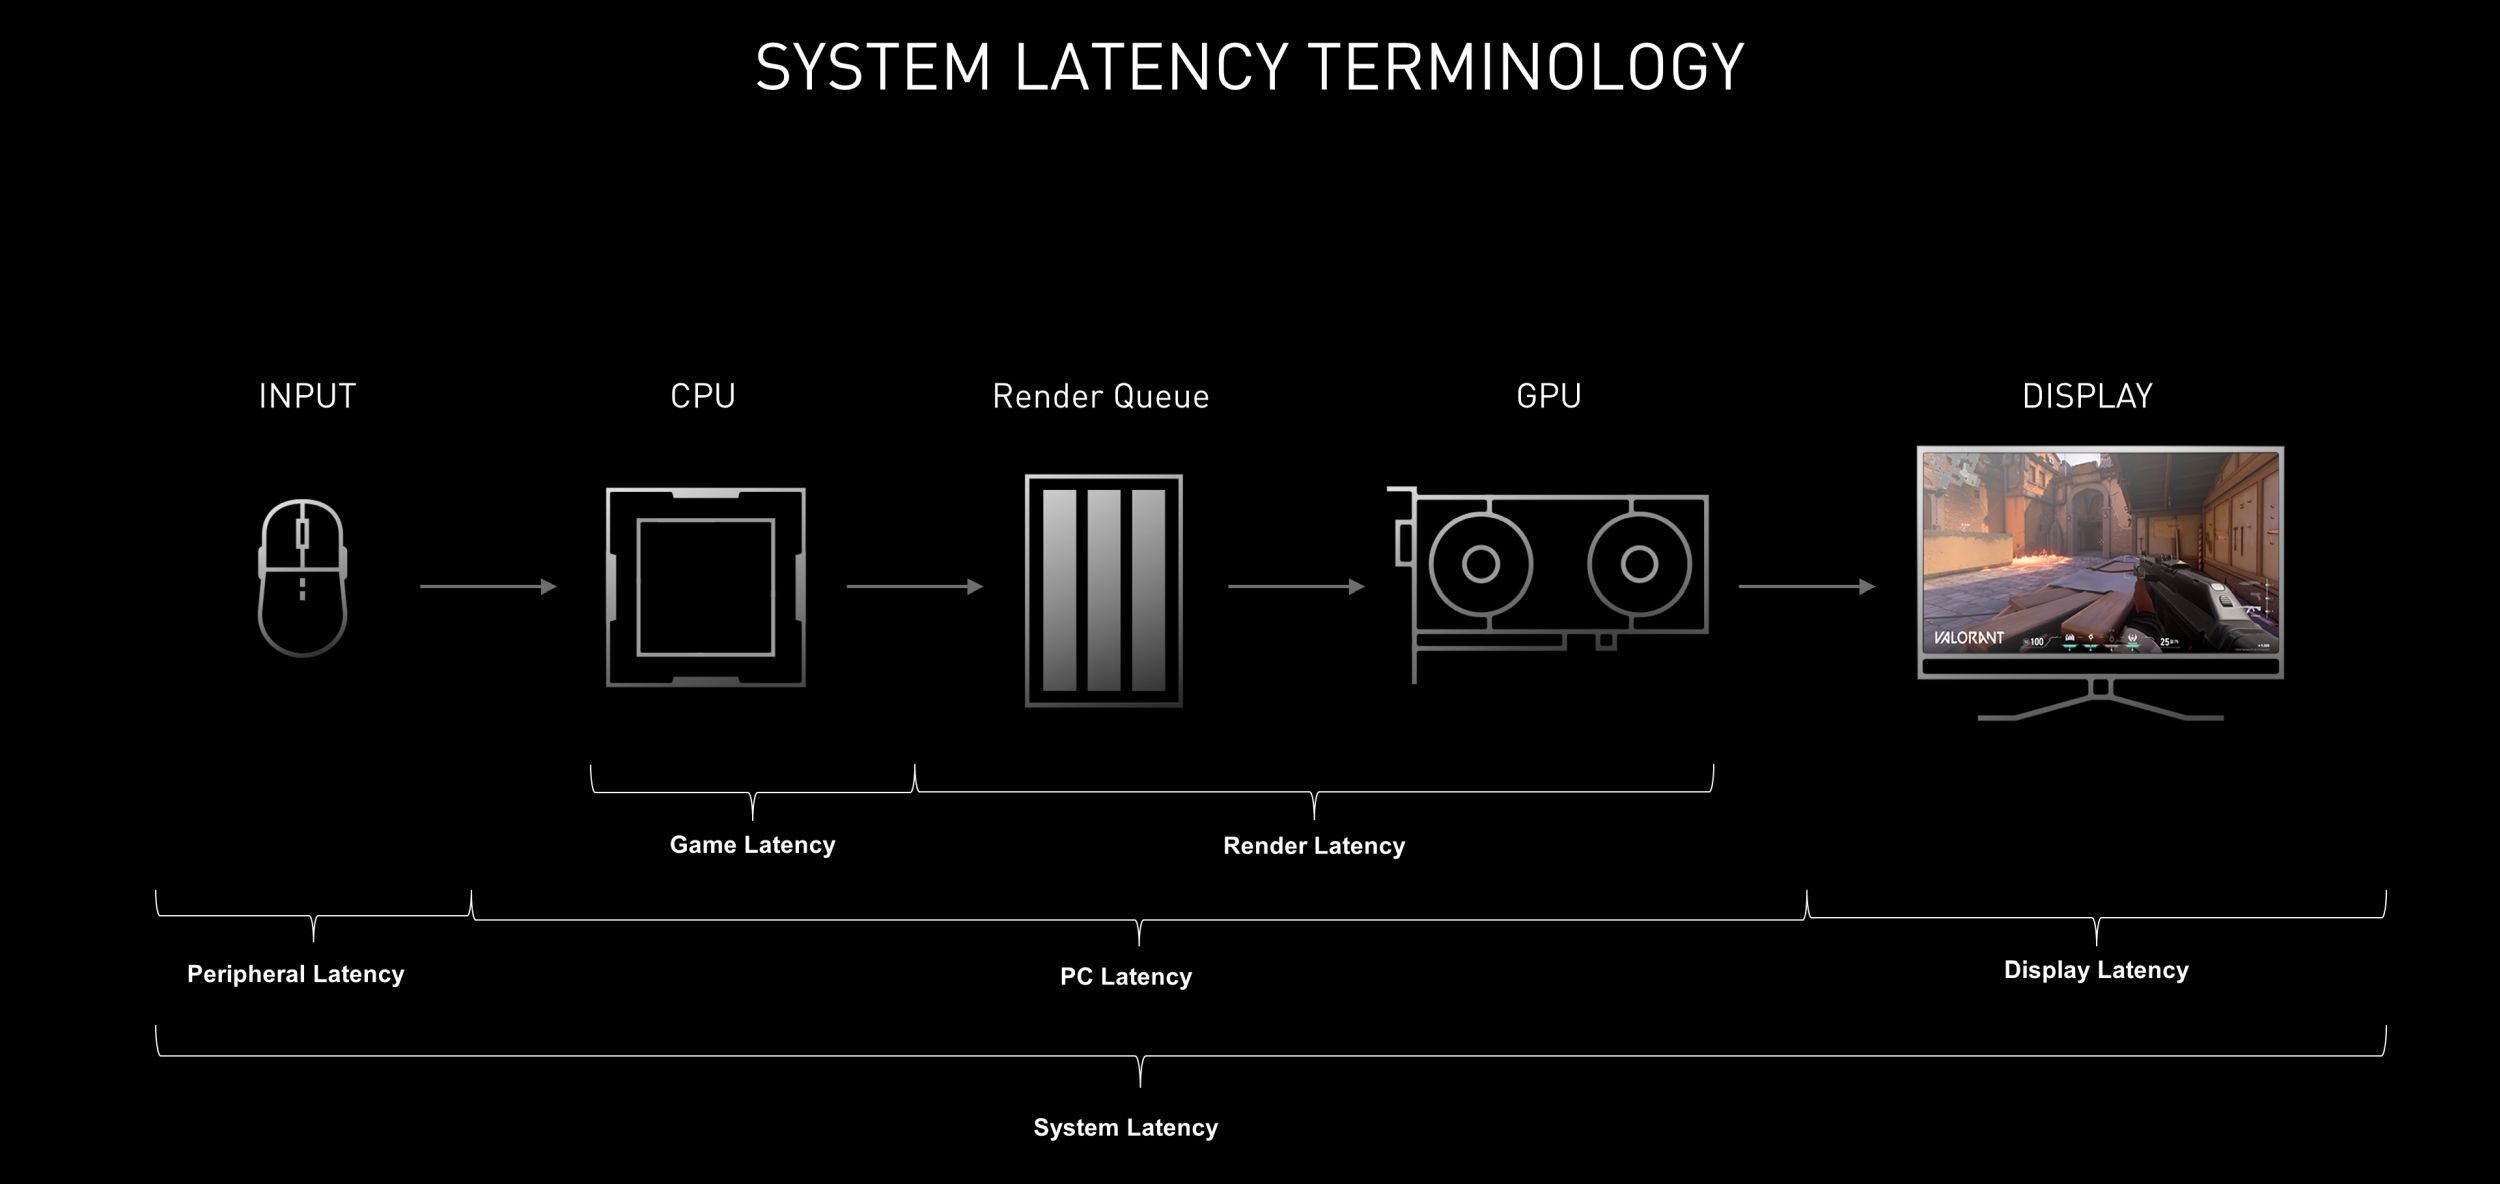 System Latency Terminology graphic